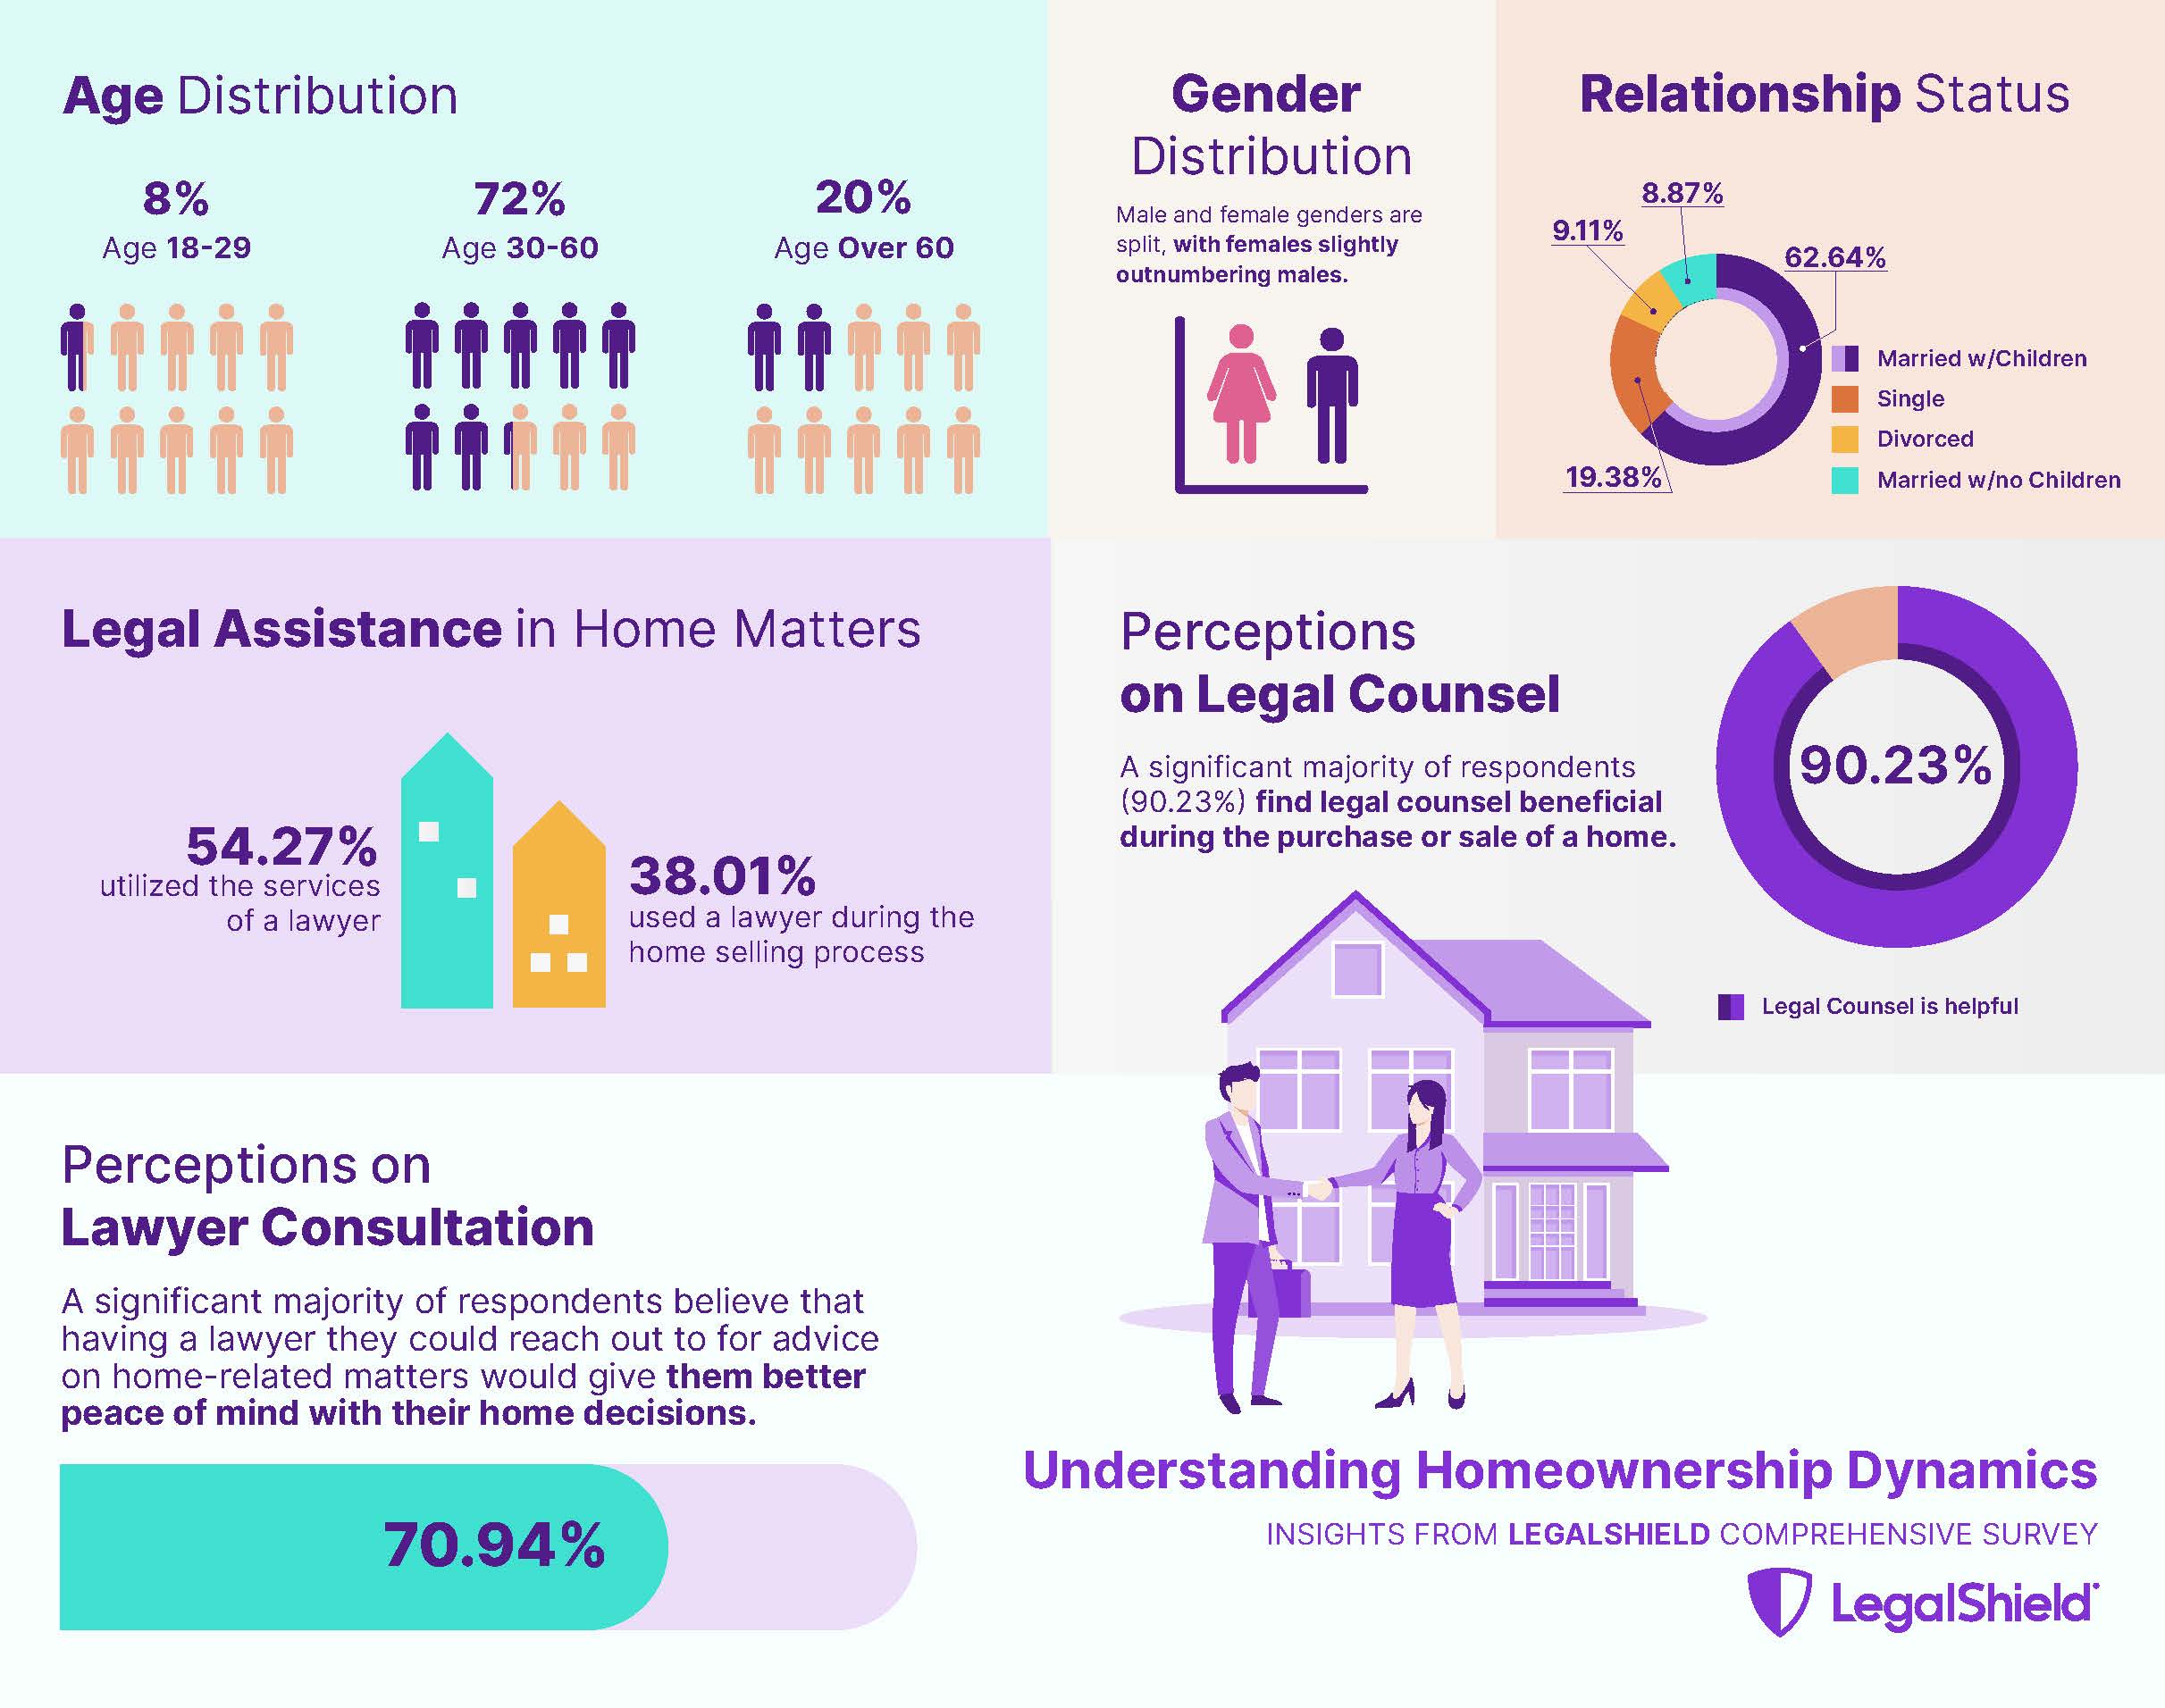 Understanding Homeownership Dynamics infographic: Insights from LegalShield comprehensive survey